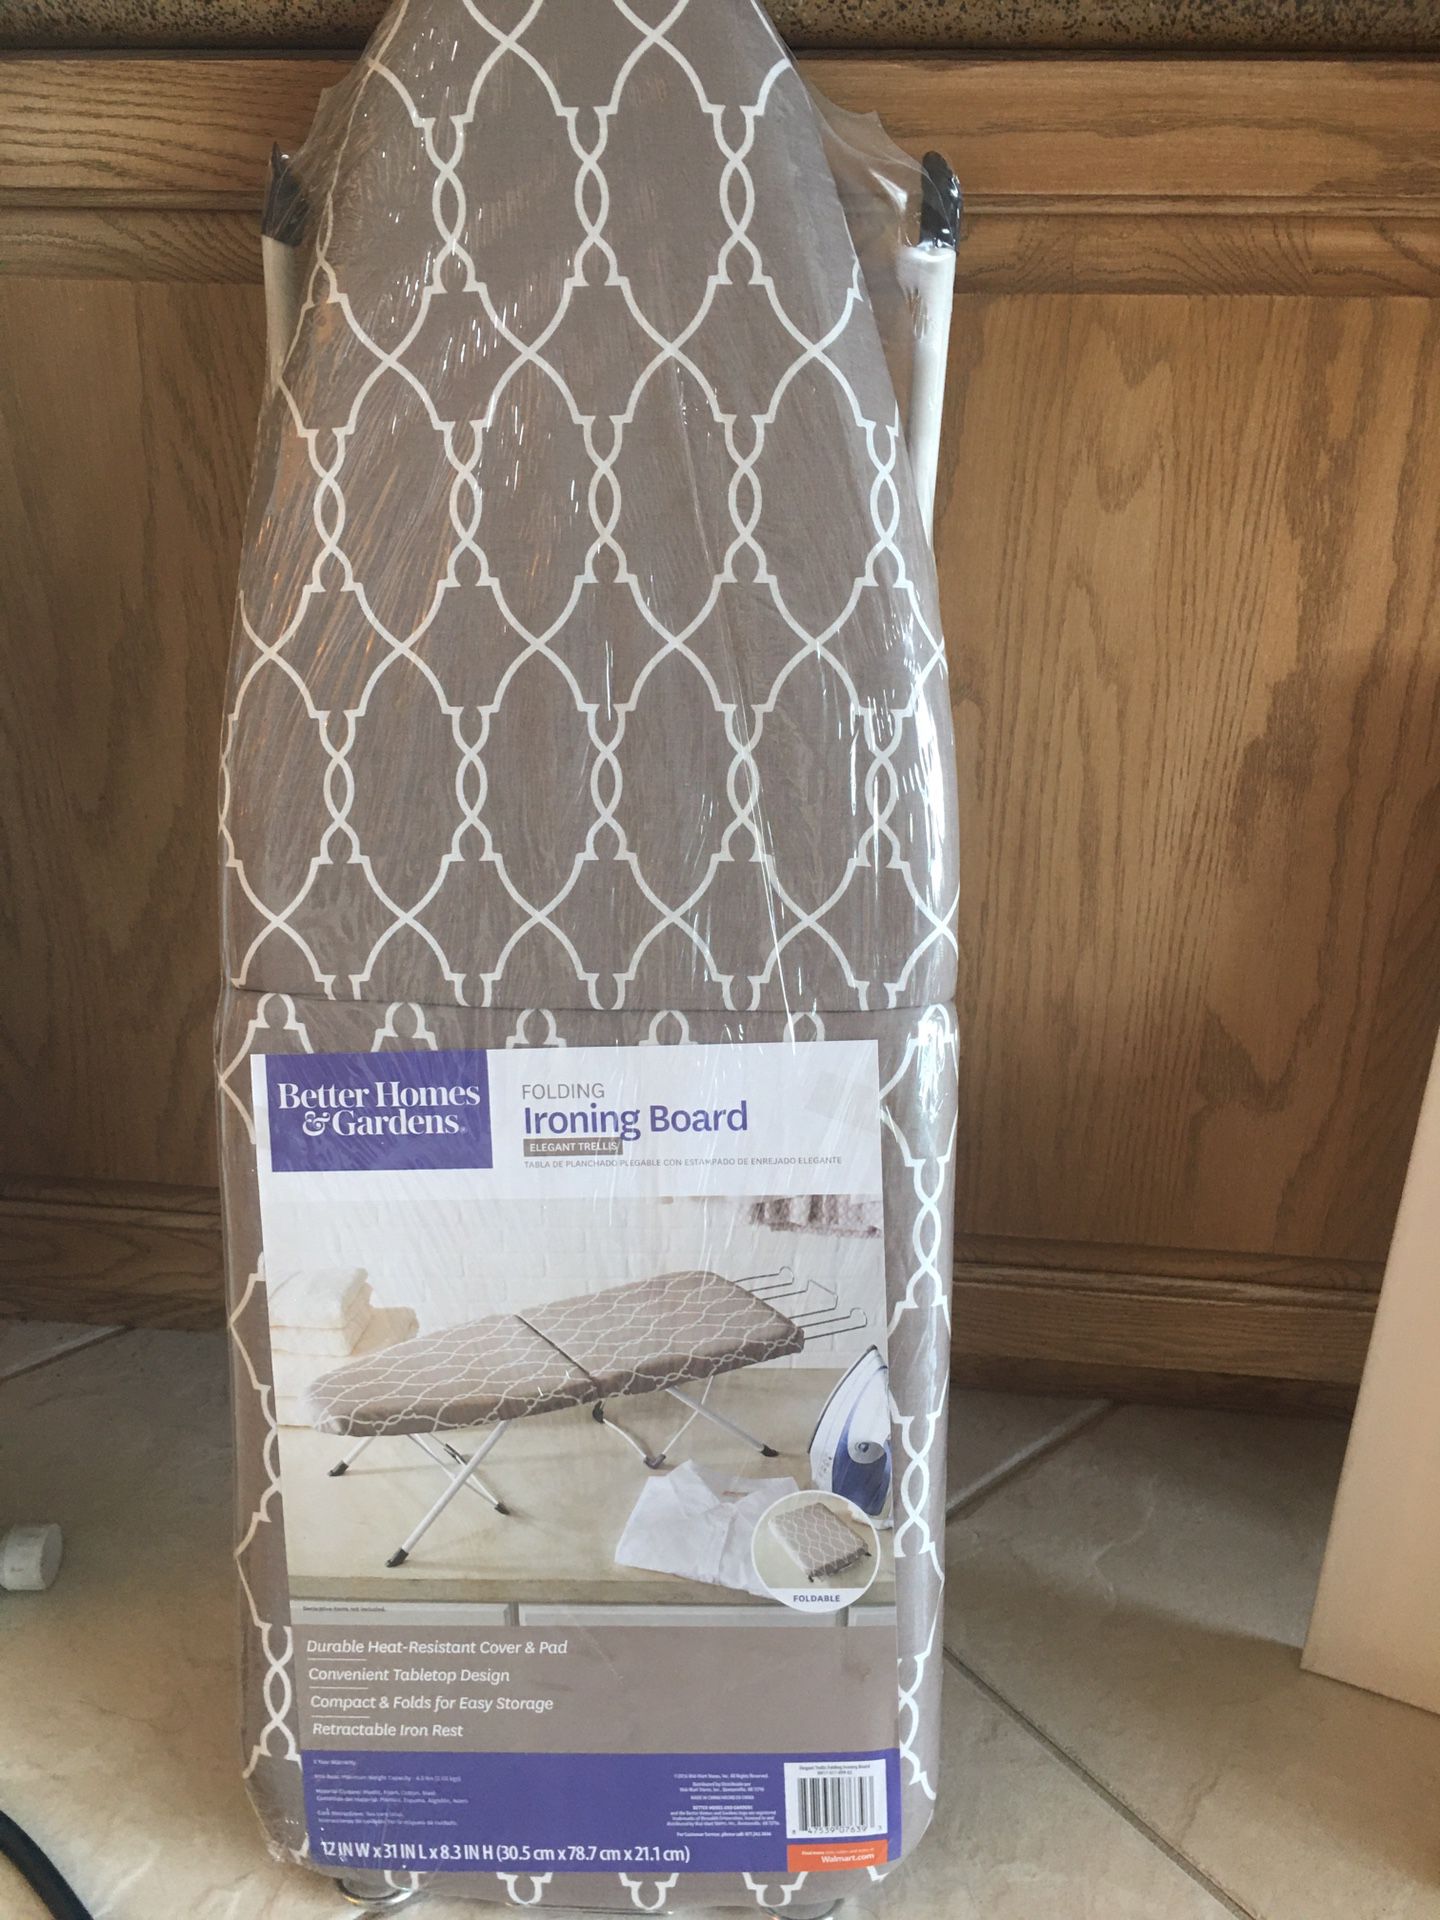 New Home and Gardens foldable ironing board